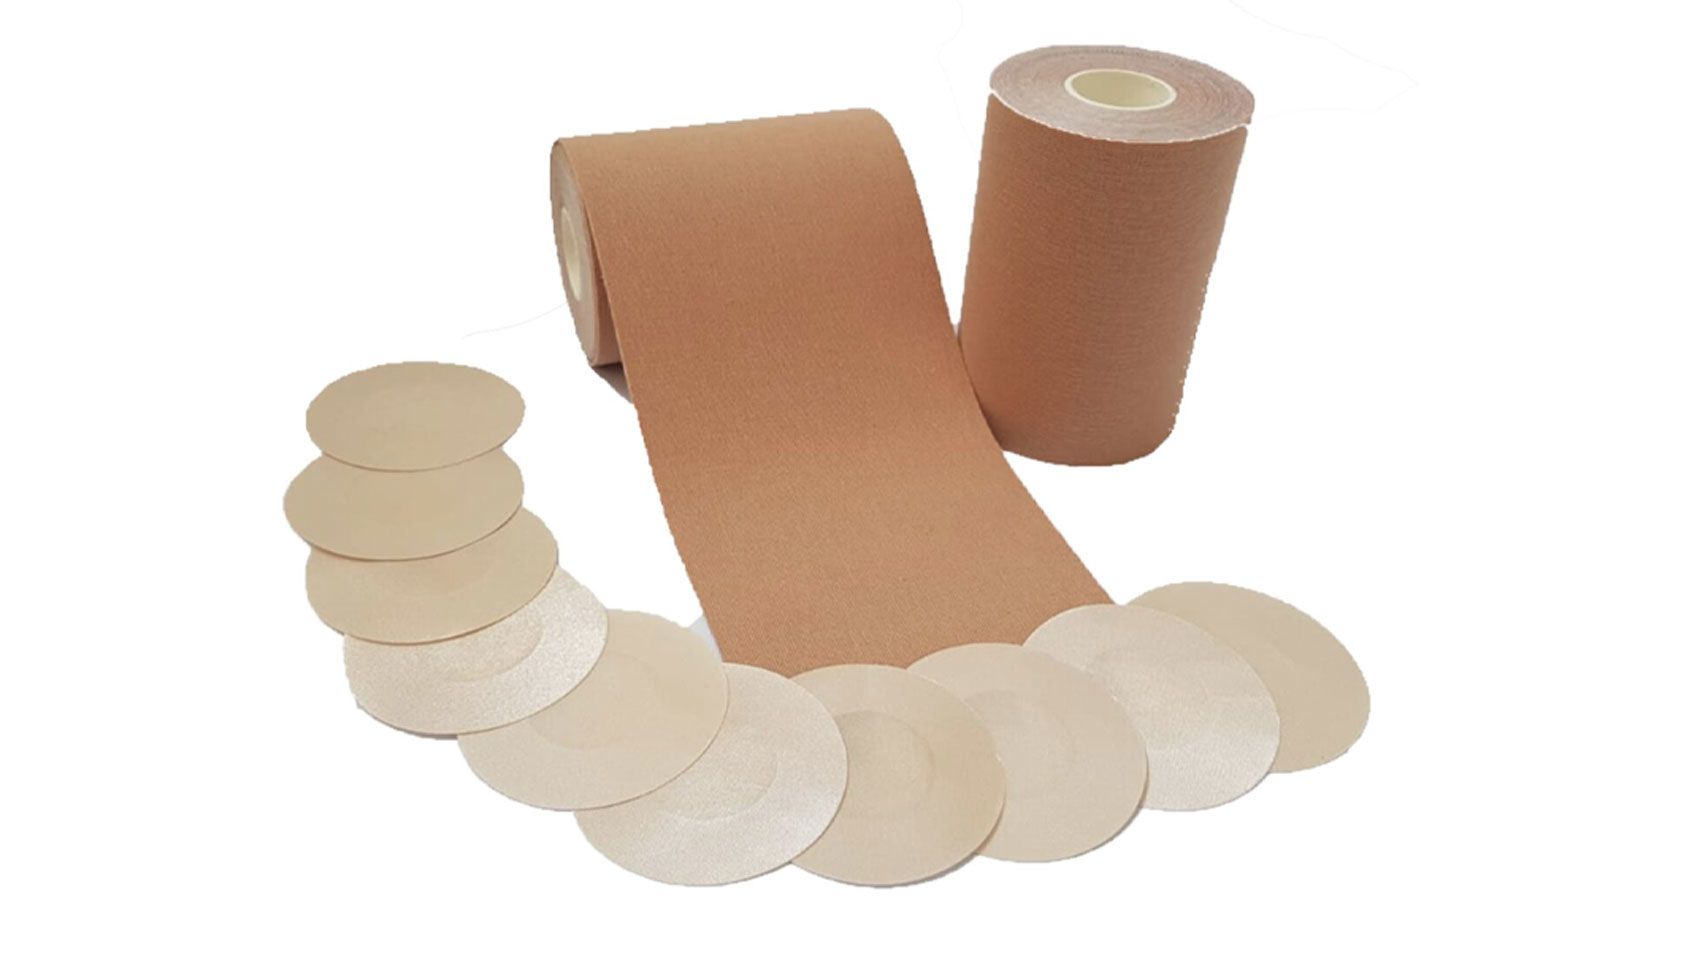 Best Boob Tape For Small Busts: Brassybra 33-Pack Adhesive Bra, 9 Boob  Tapes and Nipple Covers That Actually Work, No Matter Your Breast Size